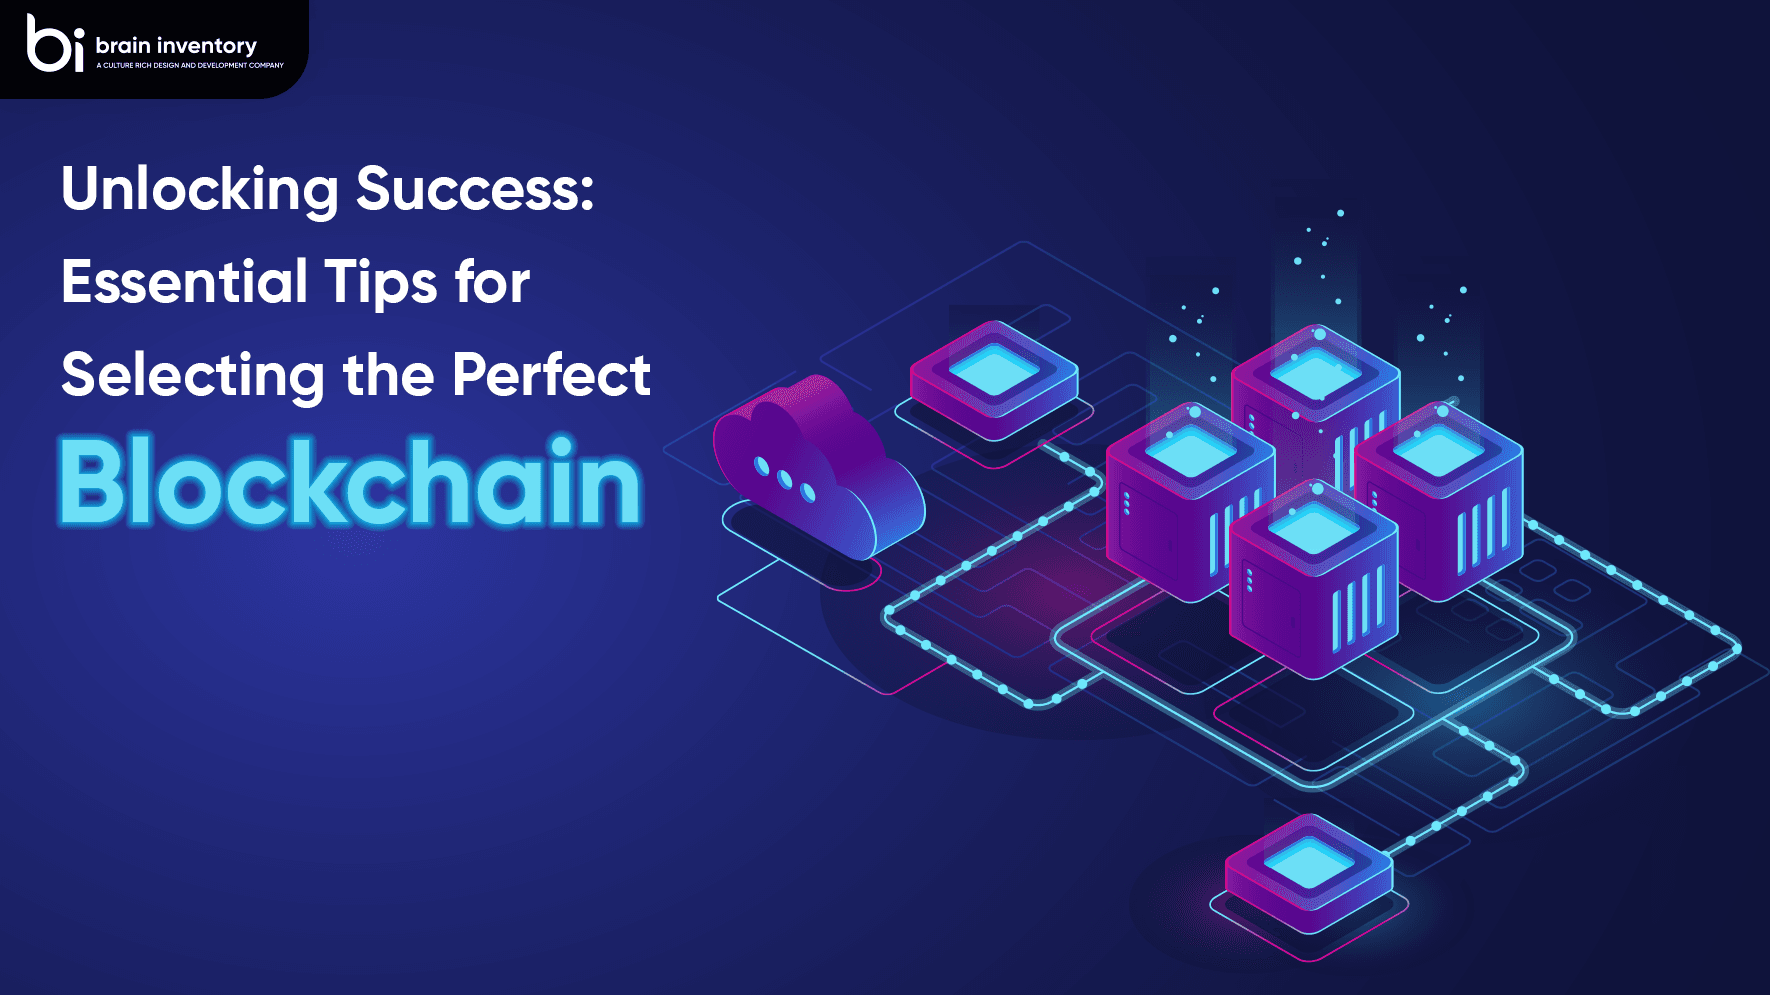 Unlocking Success: Essential Tips for Selecting the Perfect Blockchain